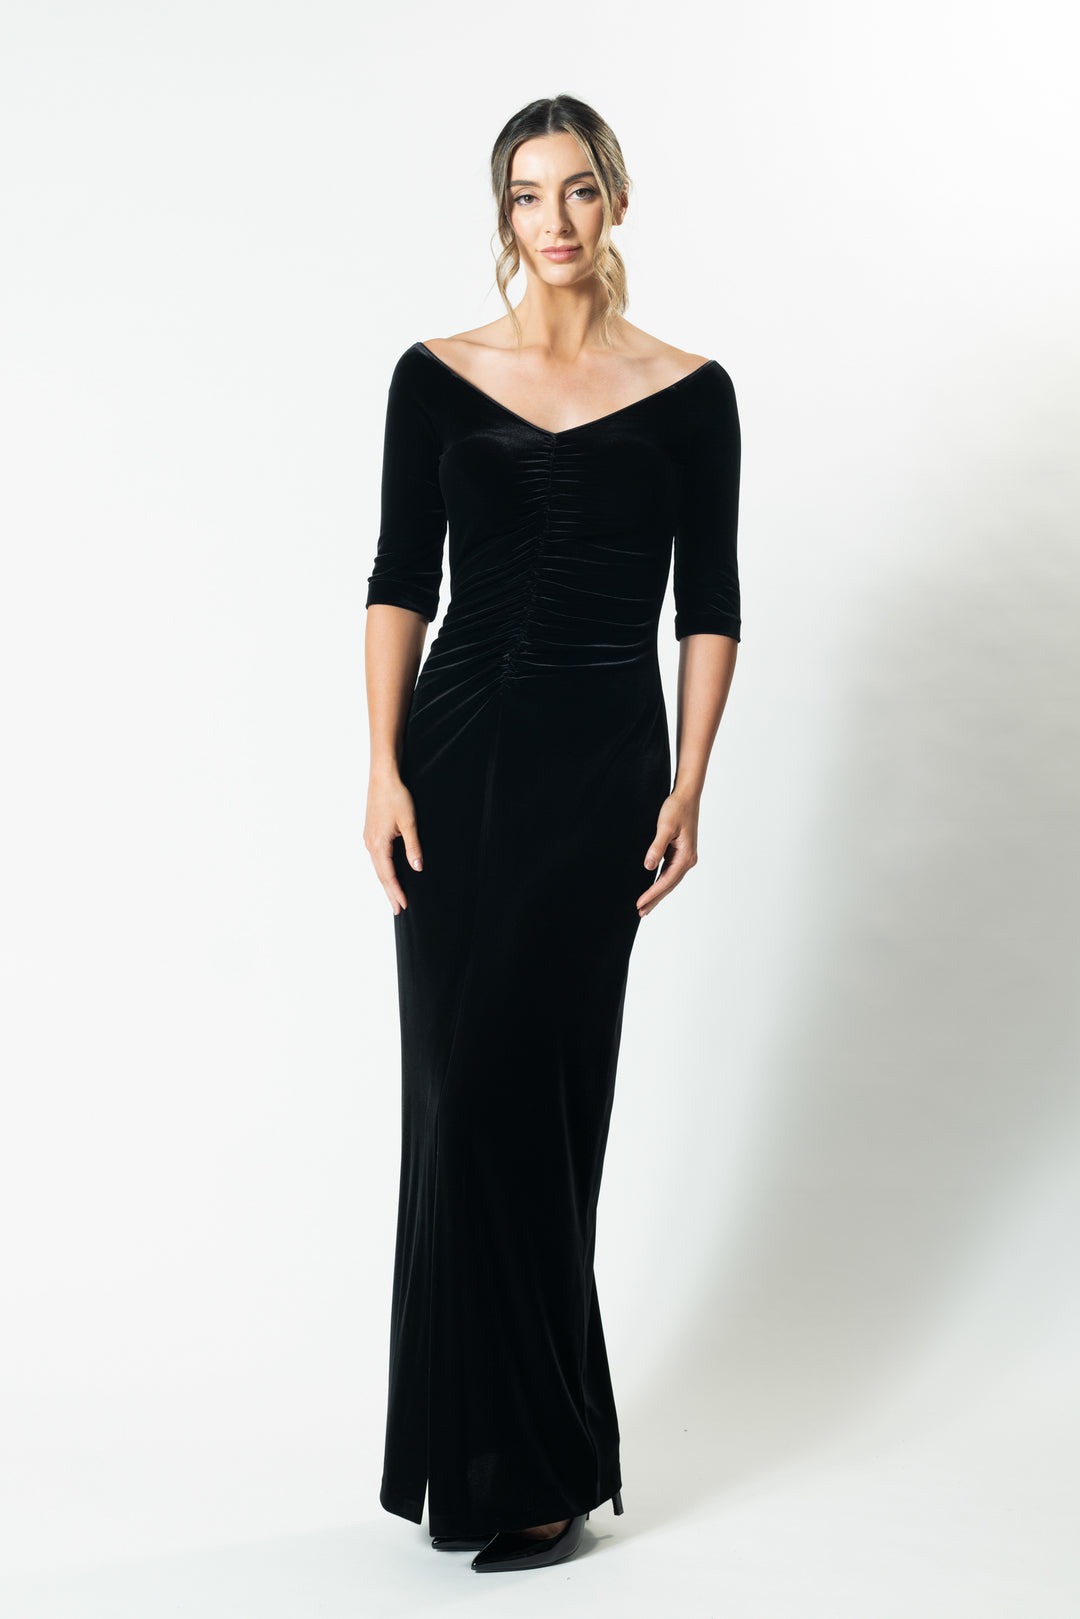 SILHOUETTE Gather Front 3/4 Sleeve Gown